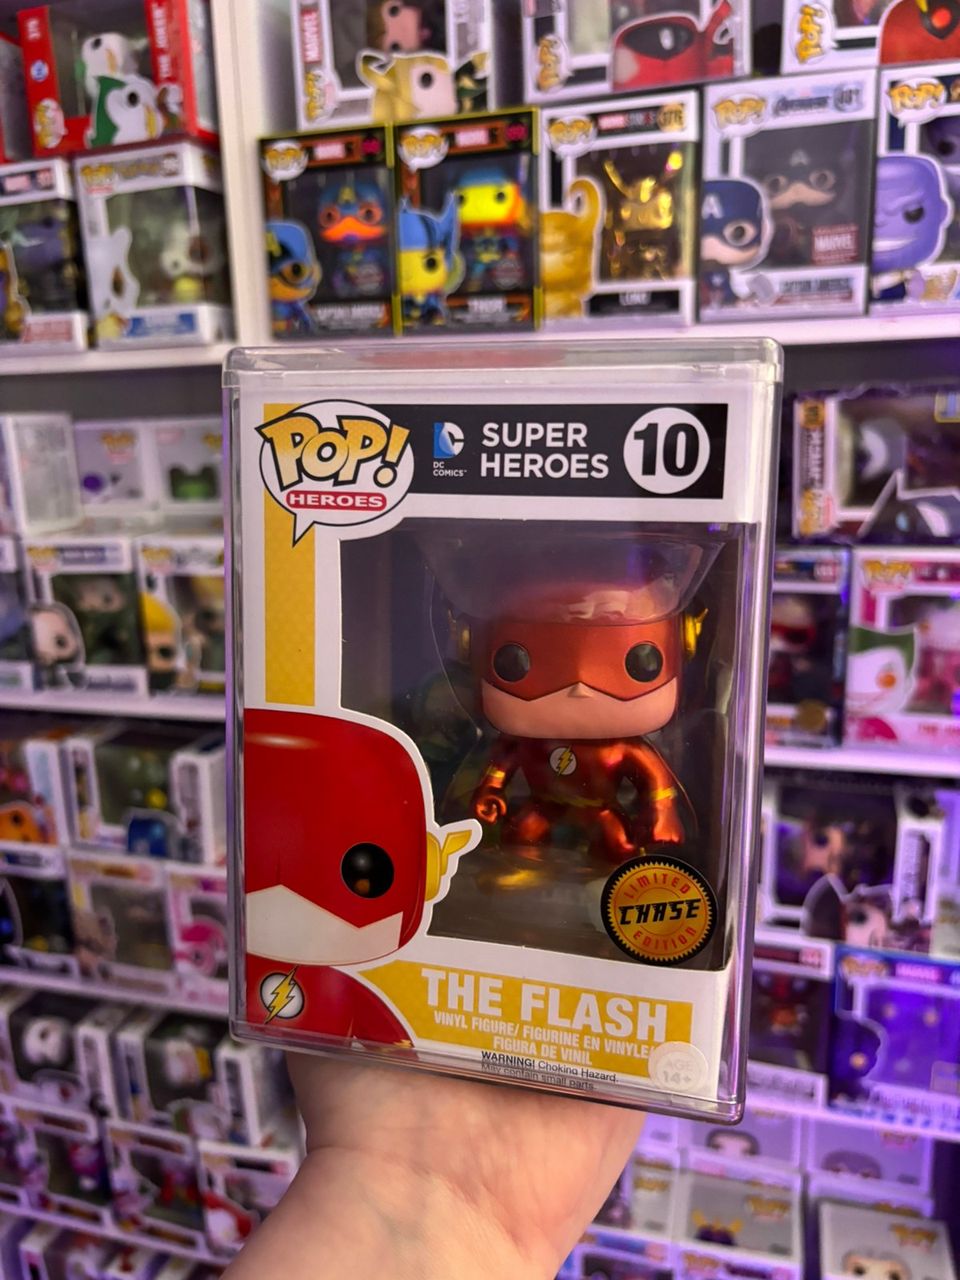 The Flash CHASE Funko pop